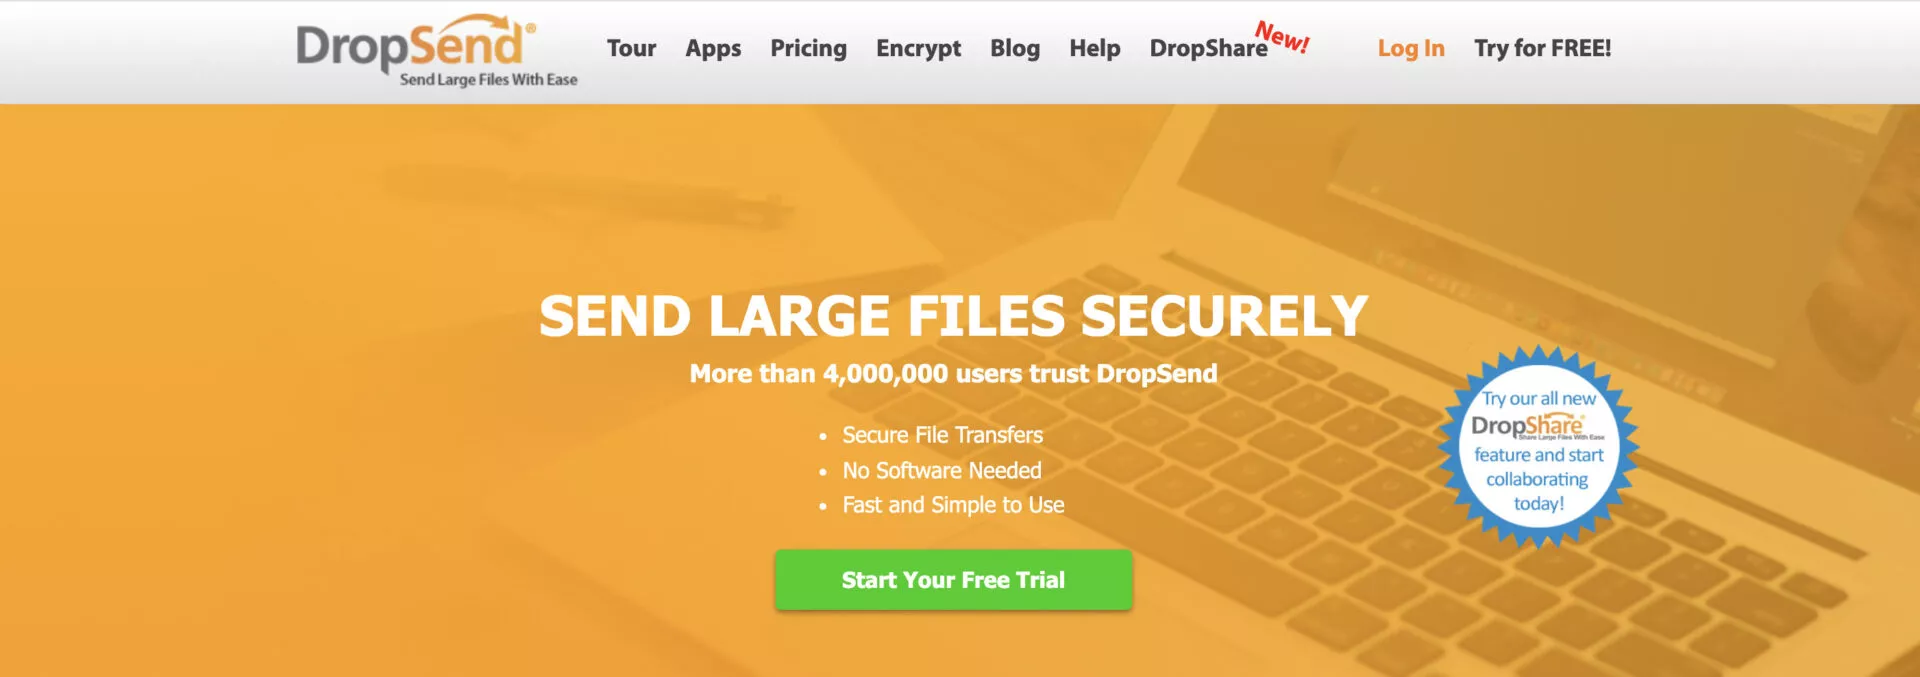 dropsend to send large files securely